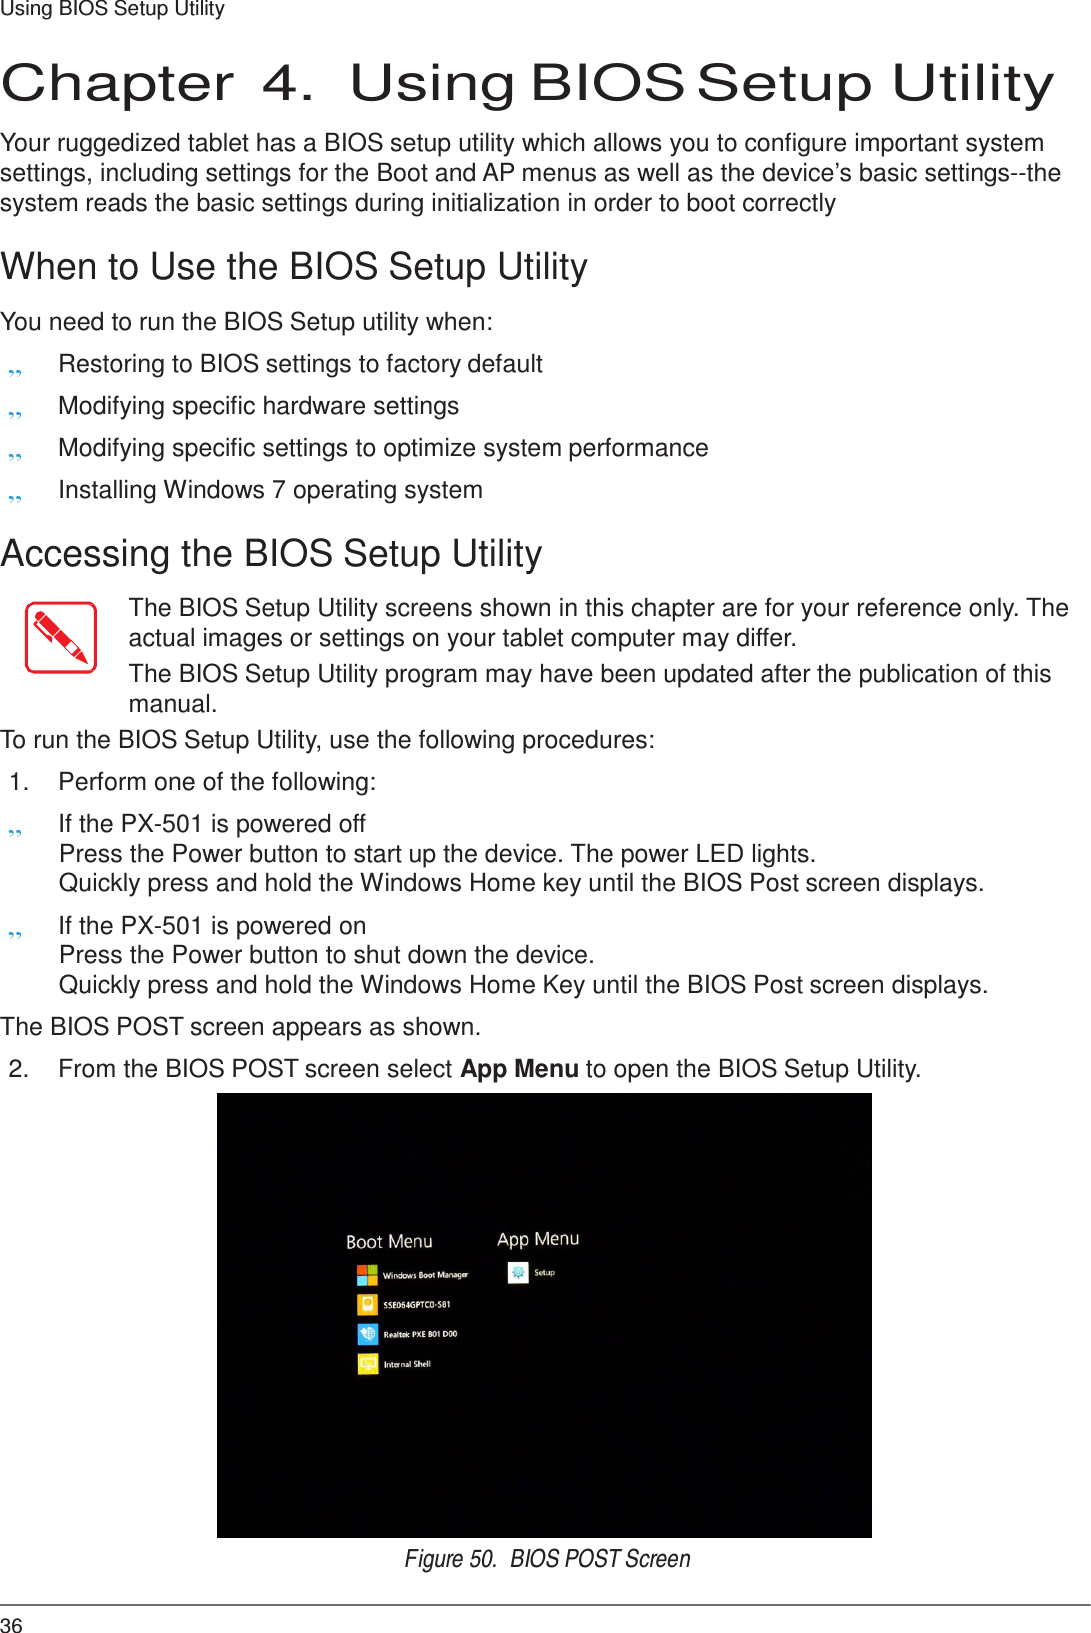 36 Using BIOS Setup Utility     Chapter  4.  Using BIOS Setup Utility  Your ruggedized tablet has a BIOS setup utility which allows you to configure important system settings, including settings for the Boot and AP menus as well as the device’s basic settings--the system reads the basic settings during initialization in order to boot correctly  When to Use the BIOS Setup Utility  You need to run the BIOS Setup utility when: „ Restoring to BIOS settings to factory default „ Modifying specific hardware settings „ Modifying specific settings to optimize system performance „ Installing Windows 7 operating system  Accessing the BIOS Setup Utility  The BIOS Setup Utility screens shown in this chapter are for your reference only. The actual images or settings on your tablet computer may differ. The BIOS Setup Utility program may have been updated after the publication of this manual. To run the BIOS Setup Utility, use the following procedures:  1.  Perform one of the following: „ If the PX-501 is powered off Press the Power button to start up the device. The power LED lights. Quickly press and hold the Windows Home key until the BIOS Post screen displays. „ If the PX-501 is powered on Press the Power button to shut down the device. Quickly press and hold the Windows Home Key until the BIOS Post screen displays. The BIOS POST screen appears as shown. 2.  From the BIOS POST screen select App Menu to open the BIOS Setup Utility.  Figure 50.  BIOS POST Screen 